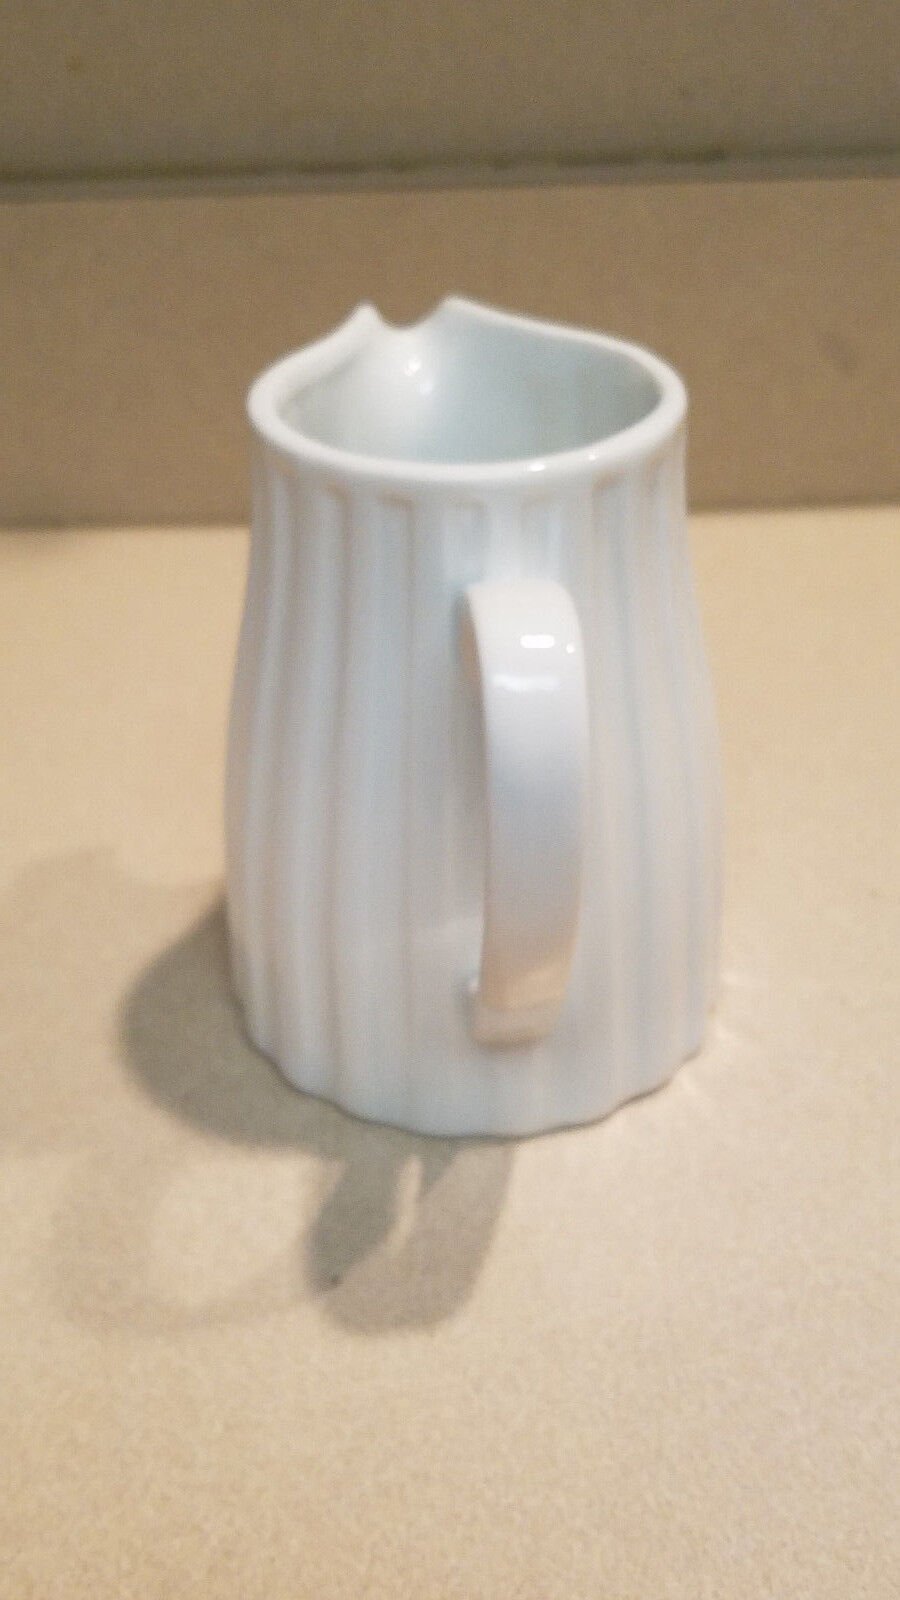 Crate & Barrel White Embedded Ribbed Design 5" Pitcher #572-144 (NEW) - $19.75